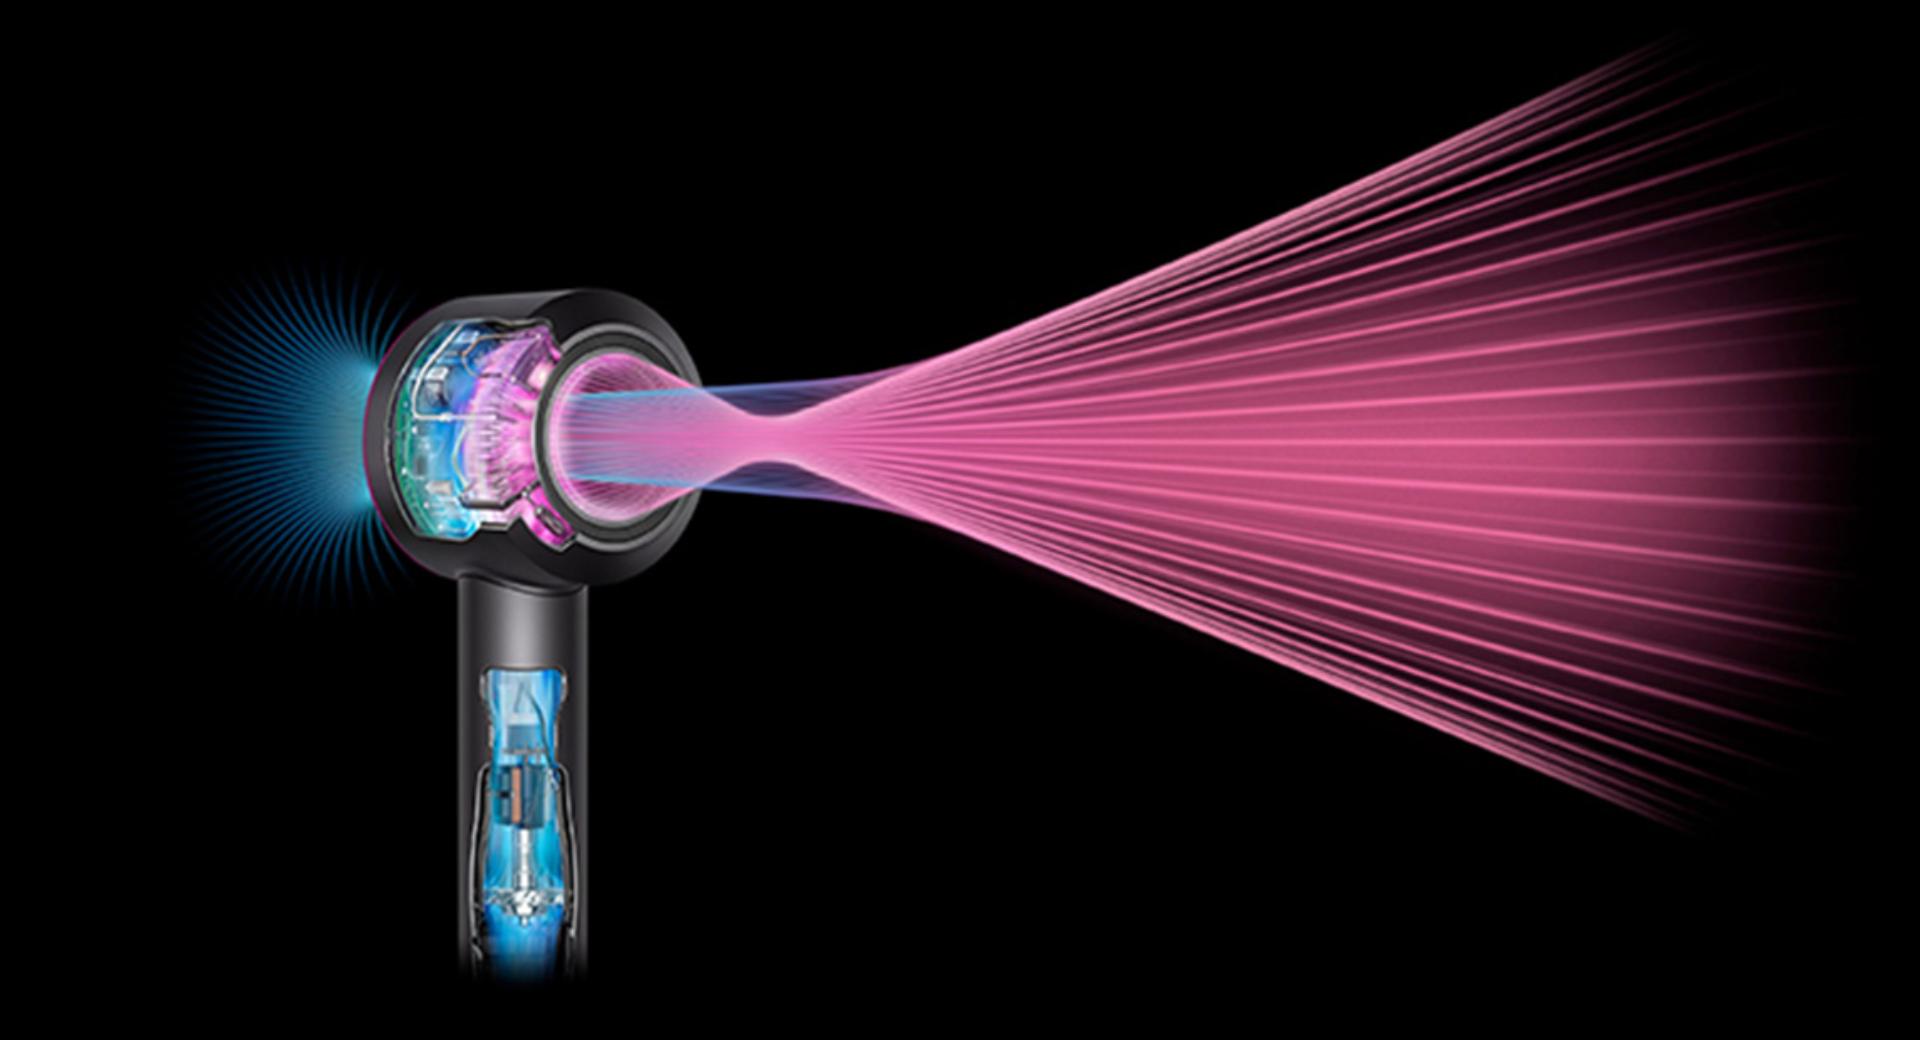 Dyson Supersonic diagram of gentle air